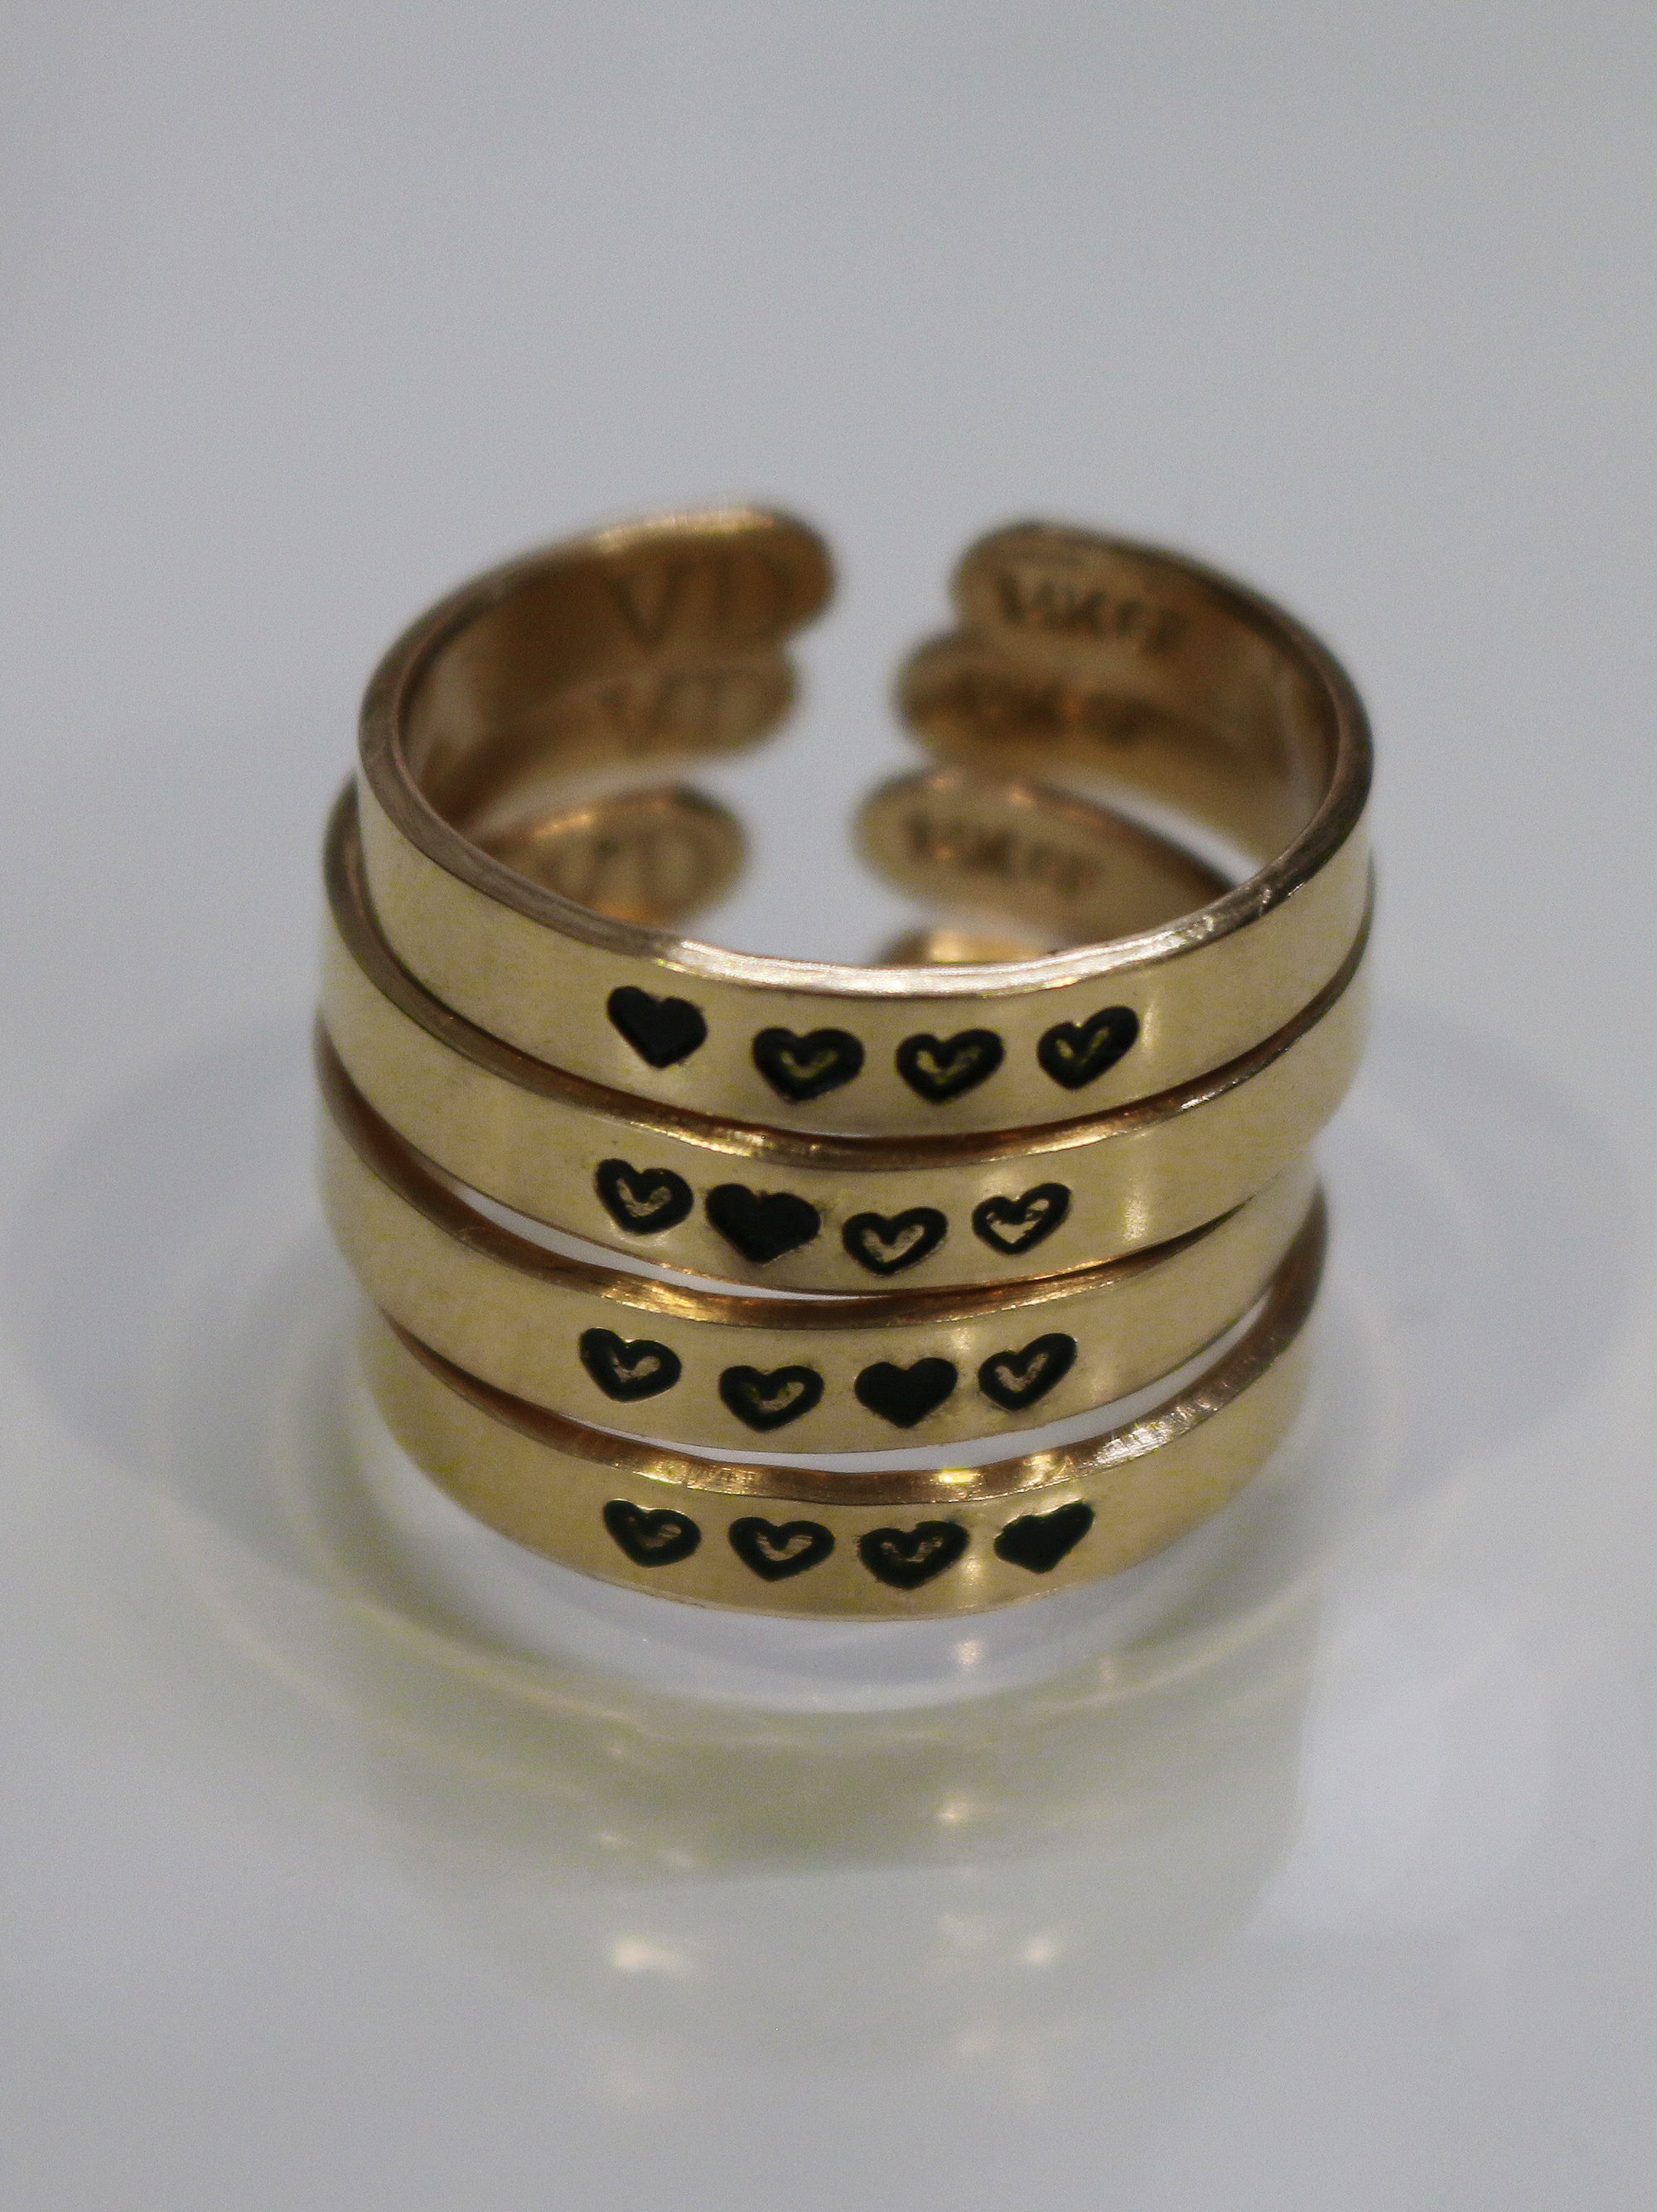 Best Friend Heart Rings for 2, 3, 4, 5, 6, 7, or 8